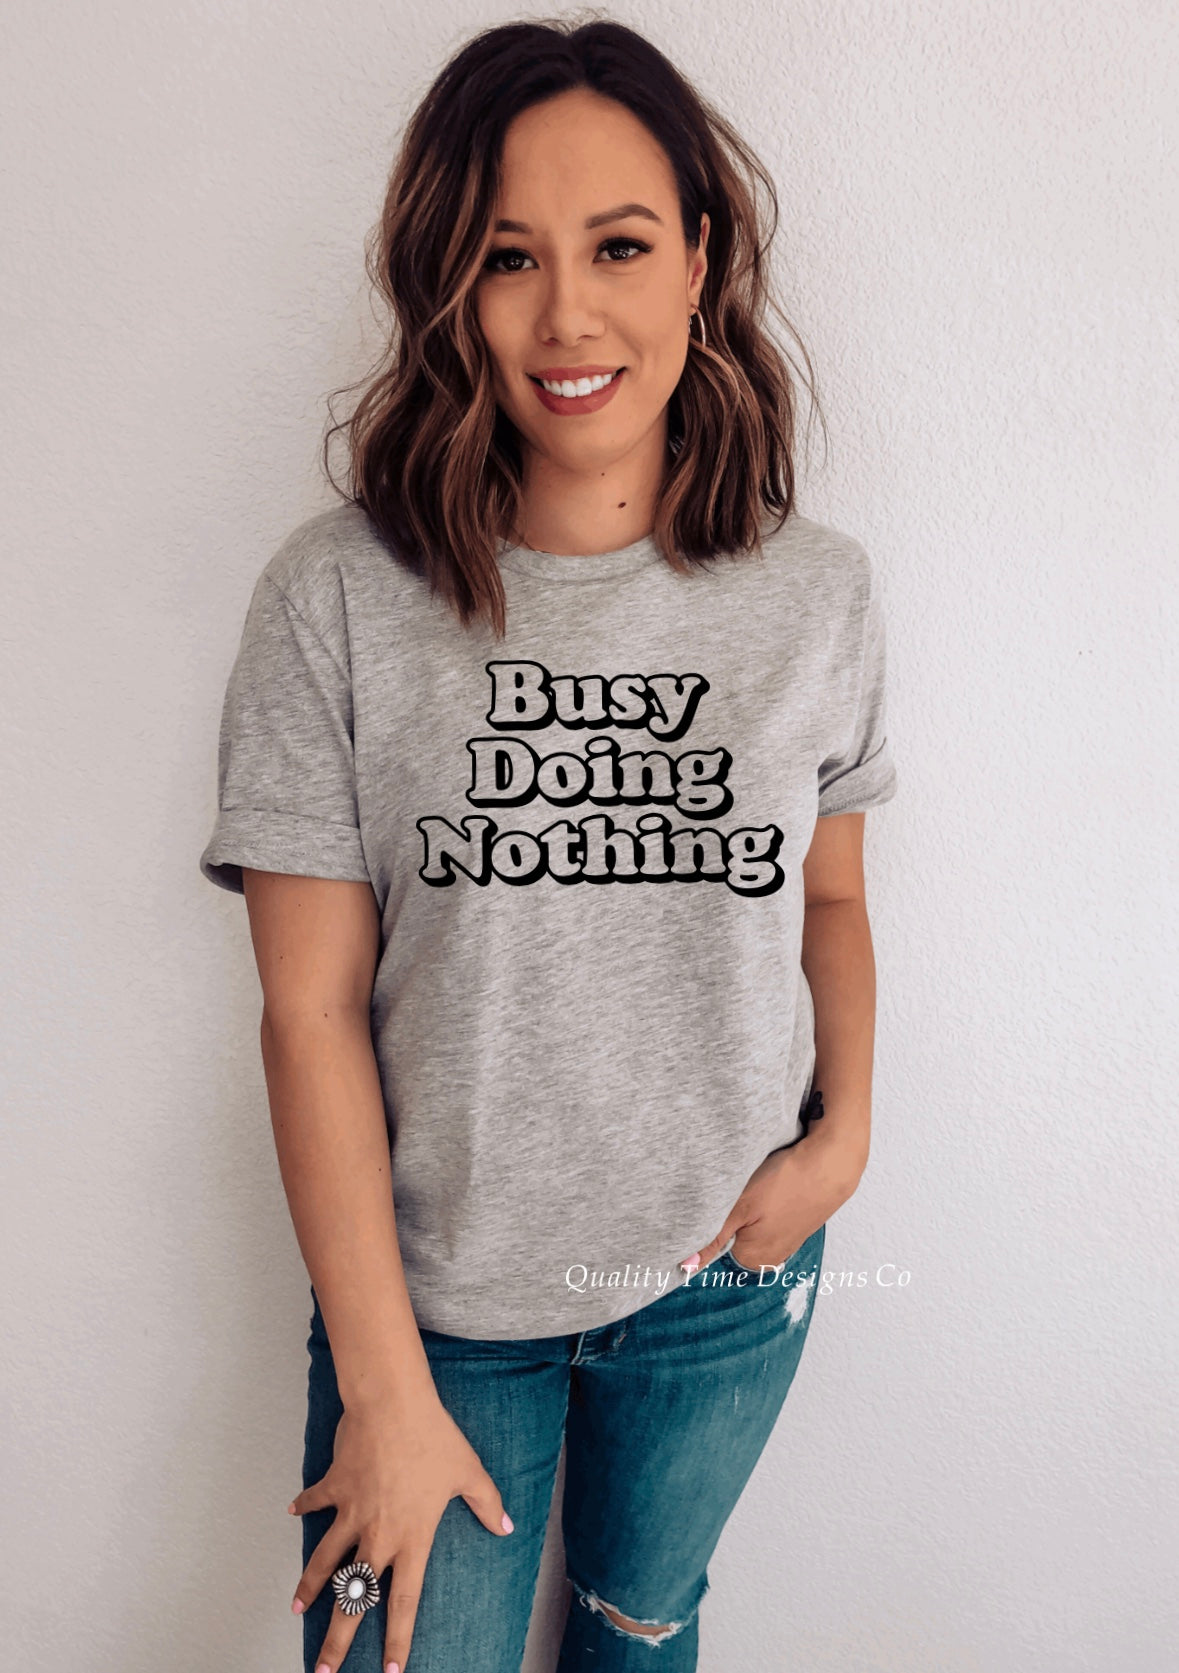 Busy doing nothing t-shirt 